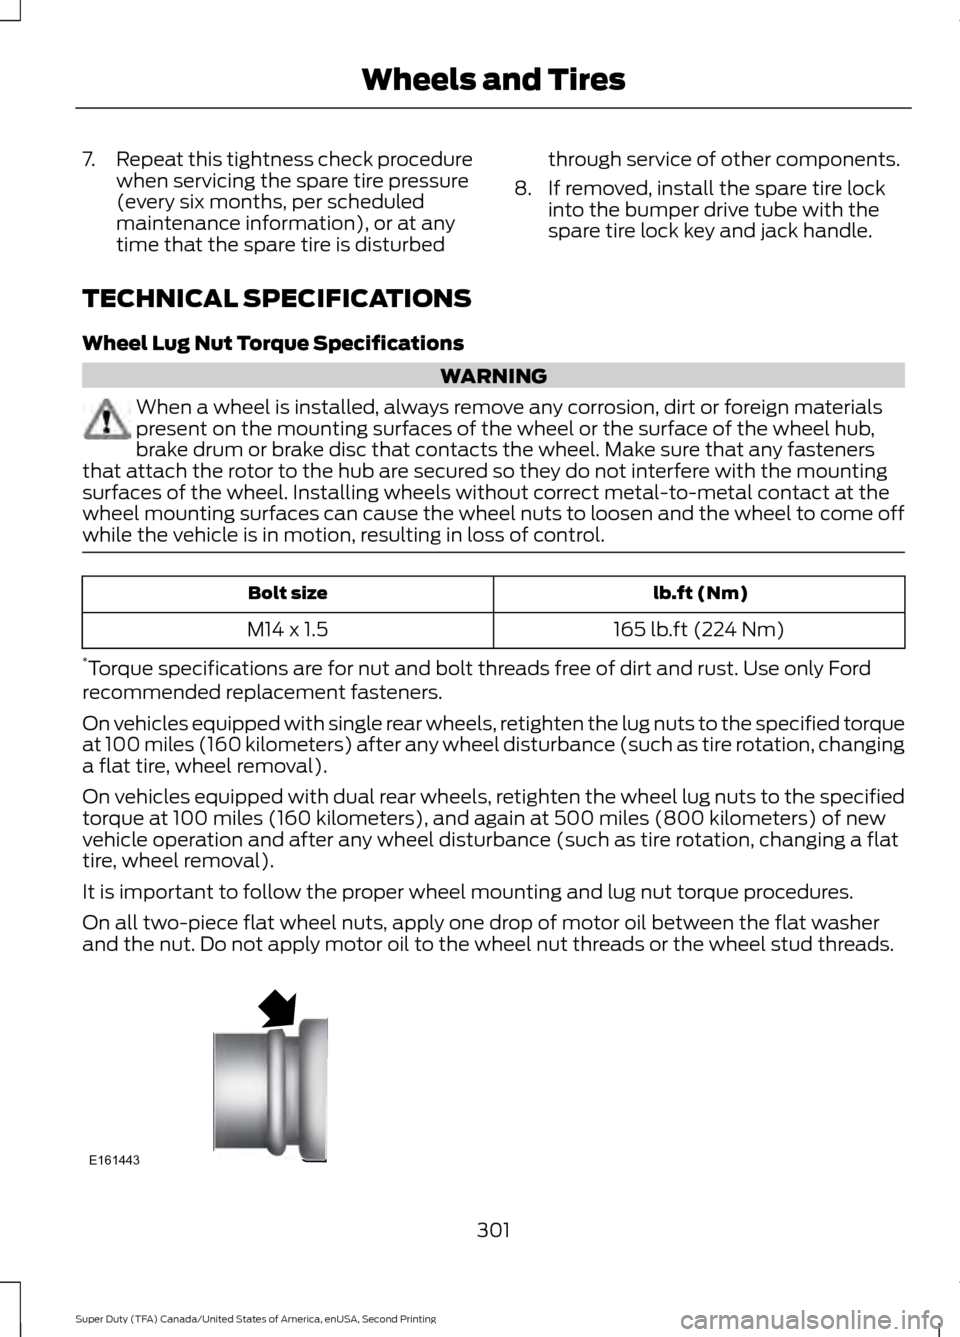 FORD SUPER DUTY 2016 3.G Owners Manual 7.
Repeat this tightness check procedure
when servicing the spare tire pressure
(every six months, per scheduled
maintenance information), or at any
time that the spare tire is disturbed through servi